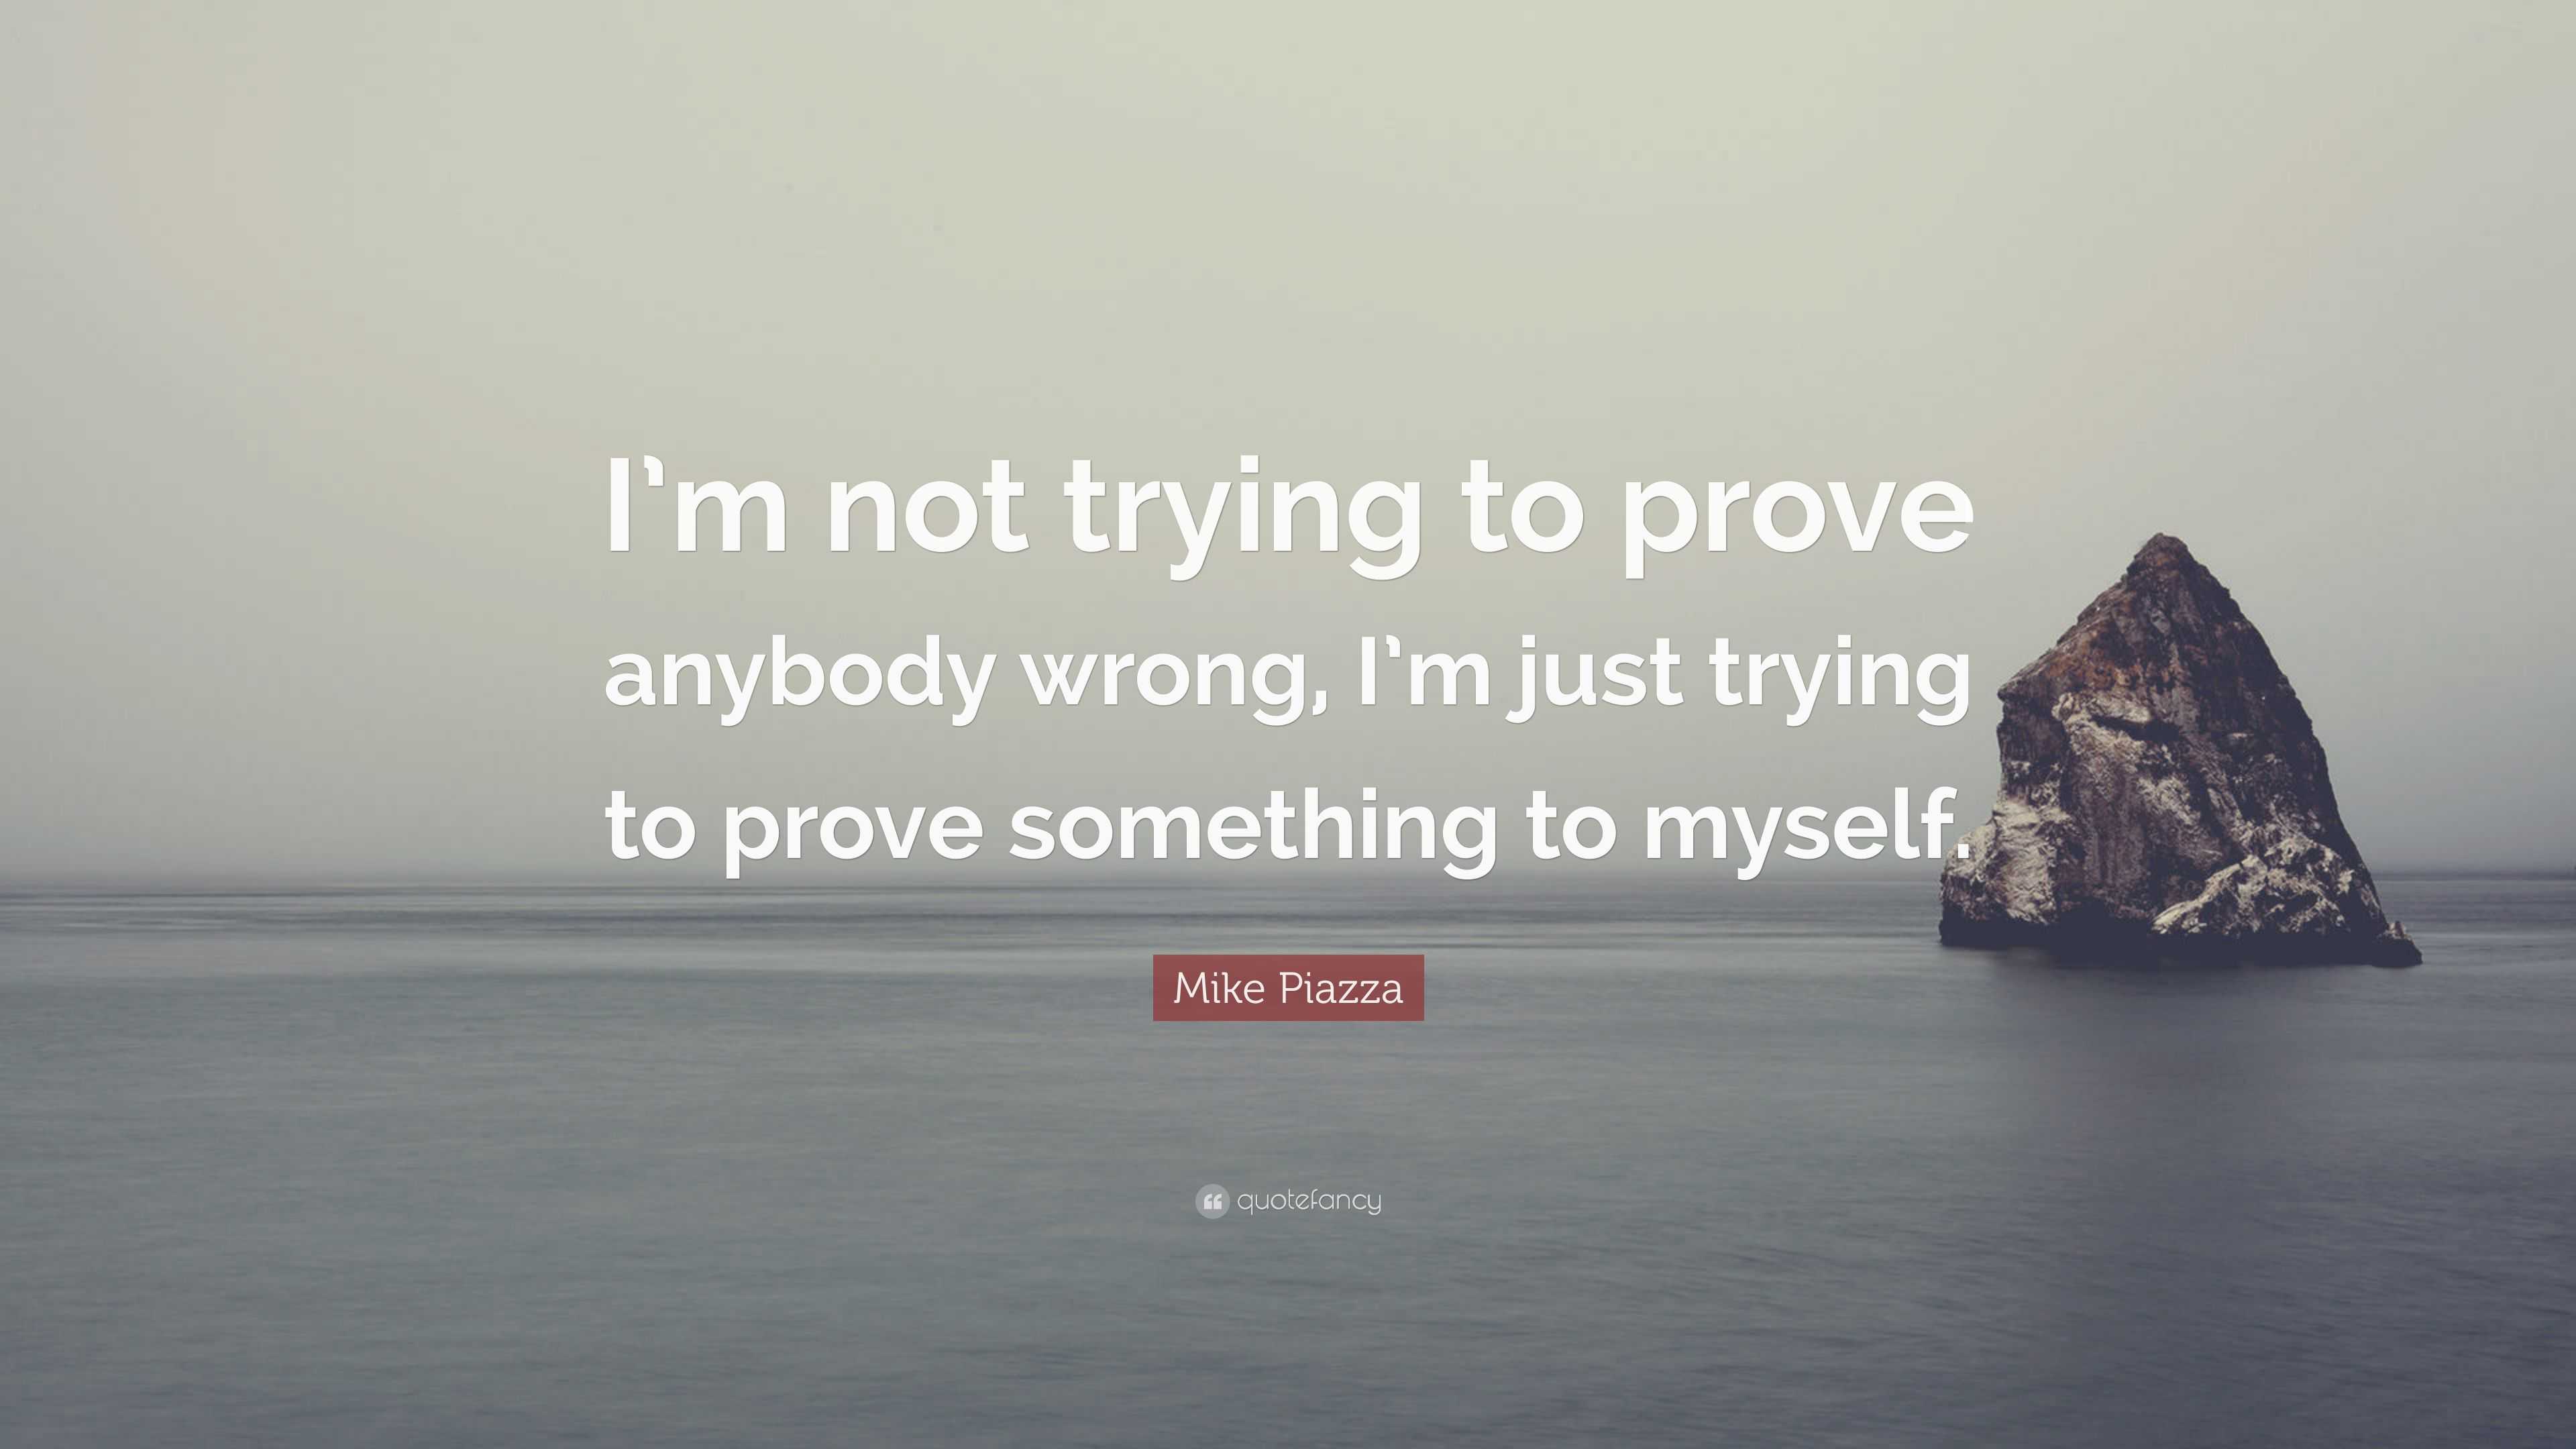 Mike Piazza Quote: “I’m not trying to prove anybody wrong, I’m just ...